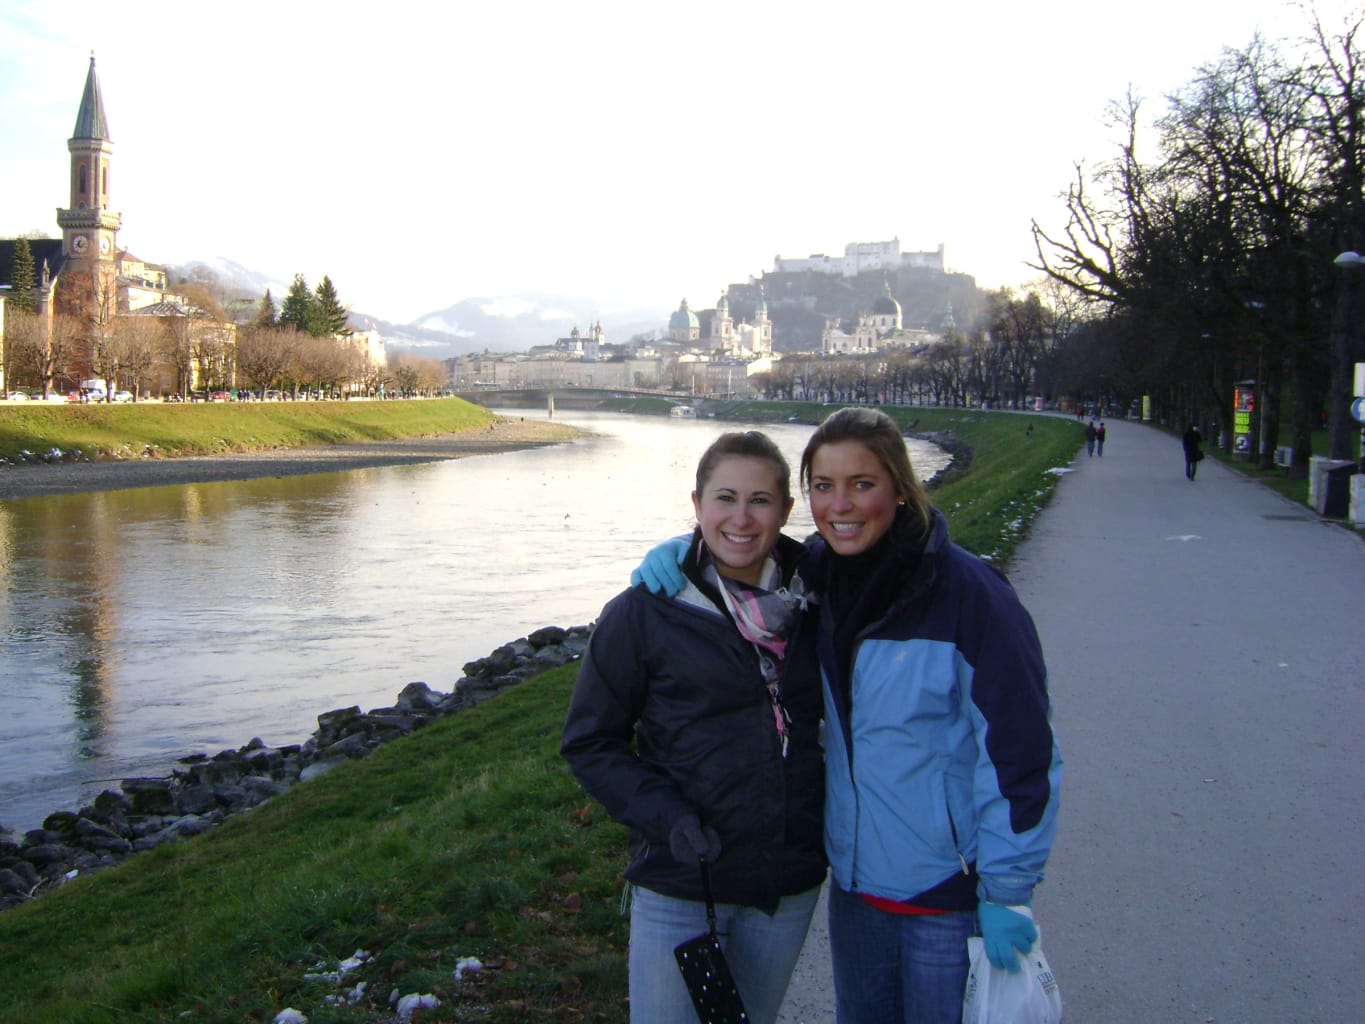 Two women by a scenic river in Salzburg, Austria.